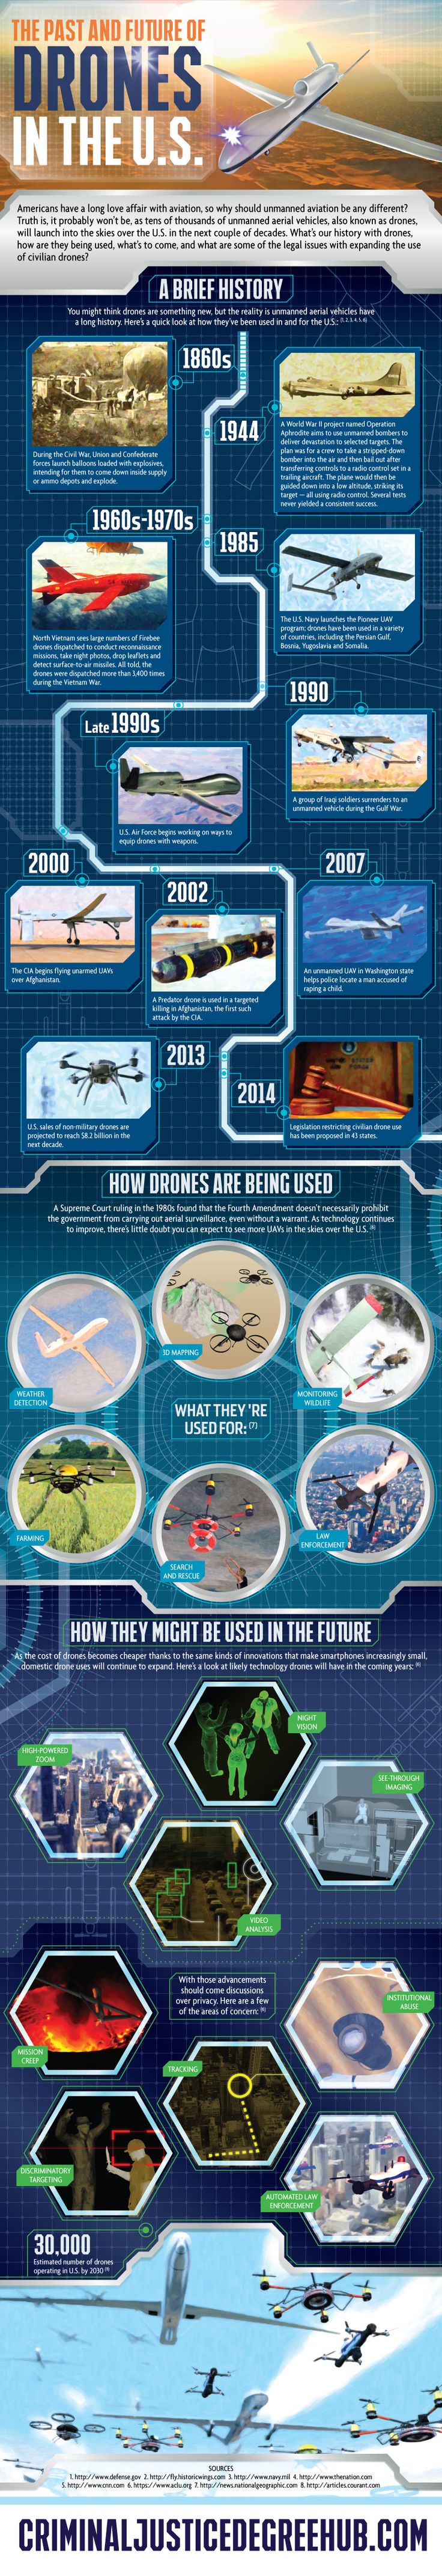 Infographic: The Past and Future of Drones in the U.S